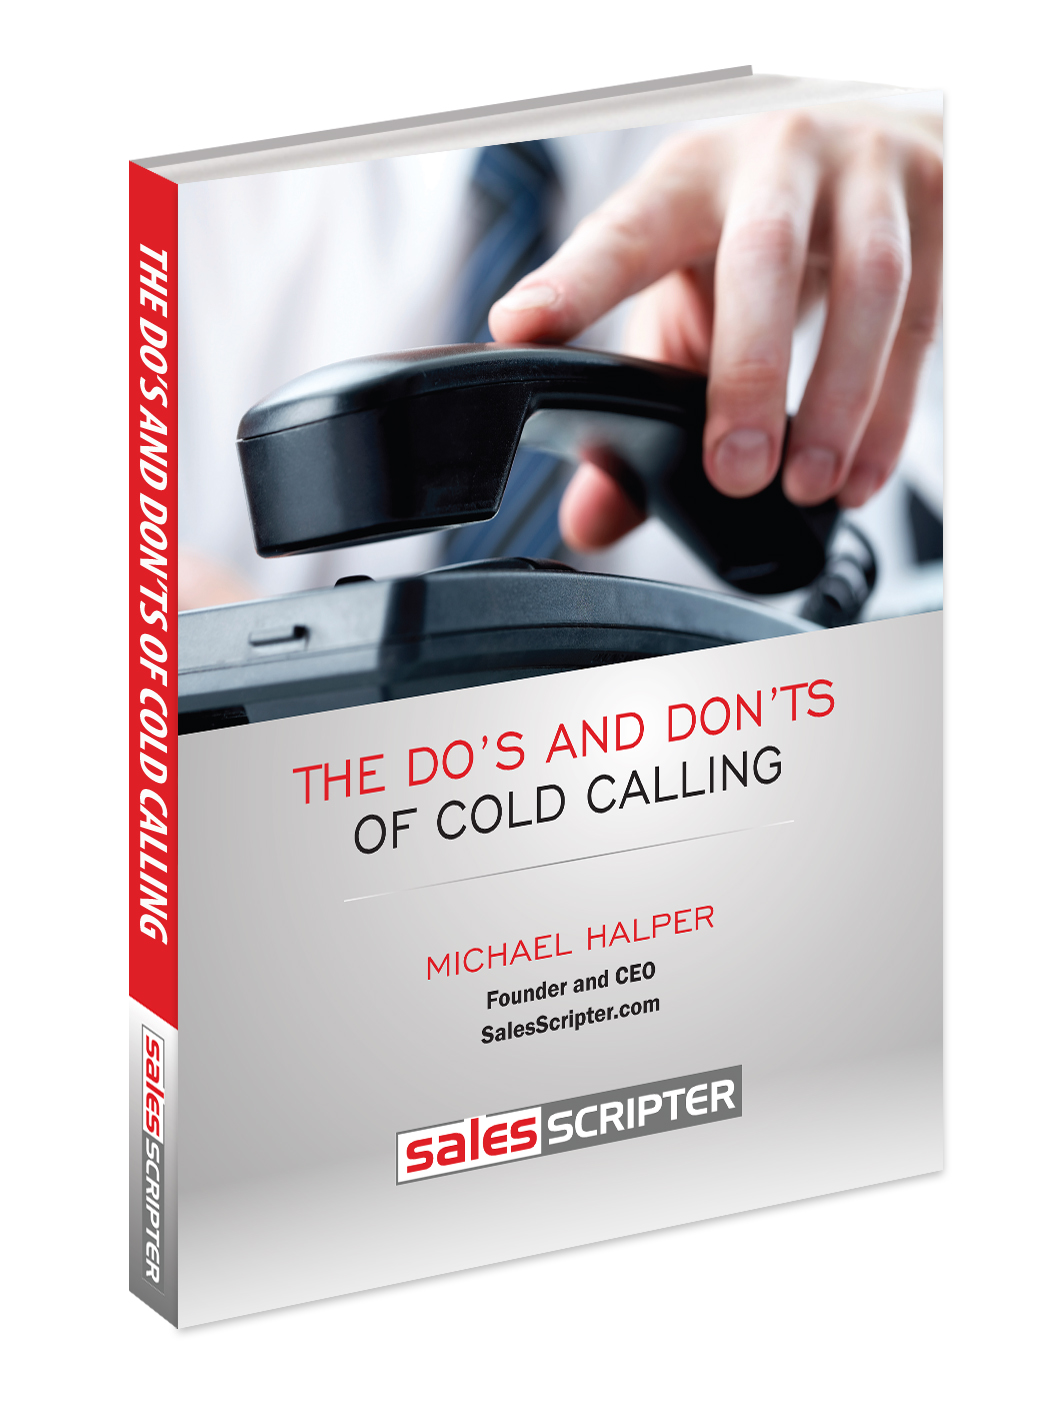 The Do’s and Don’ts of Cold Calling Ebook